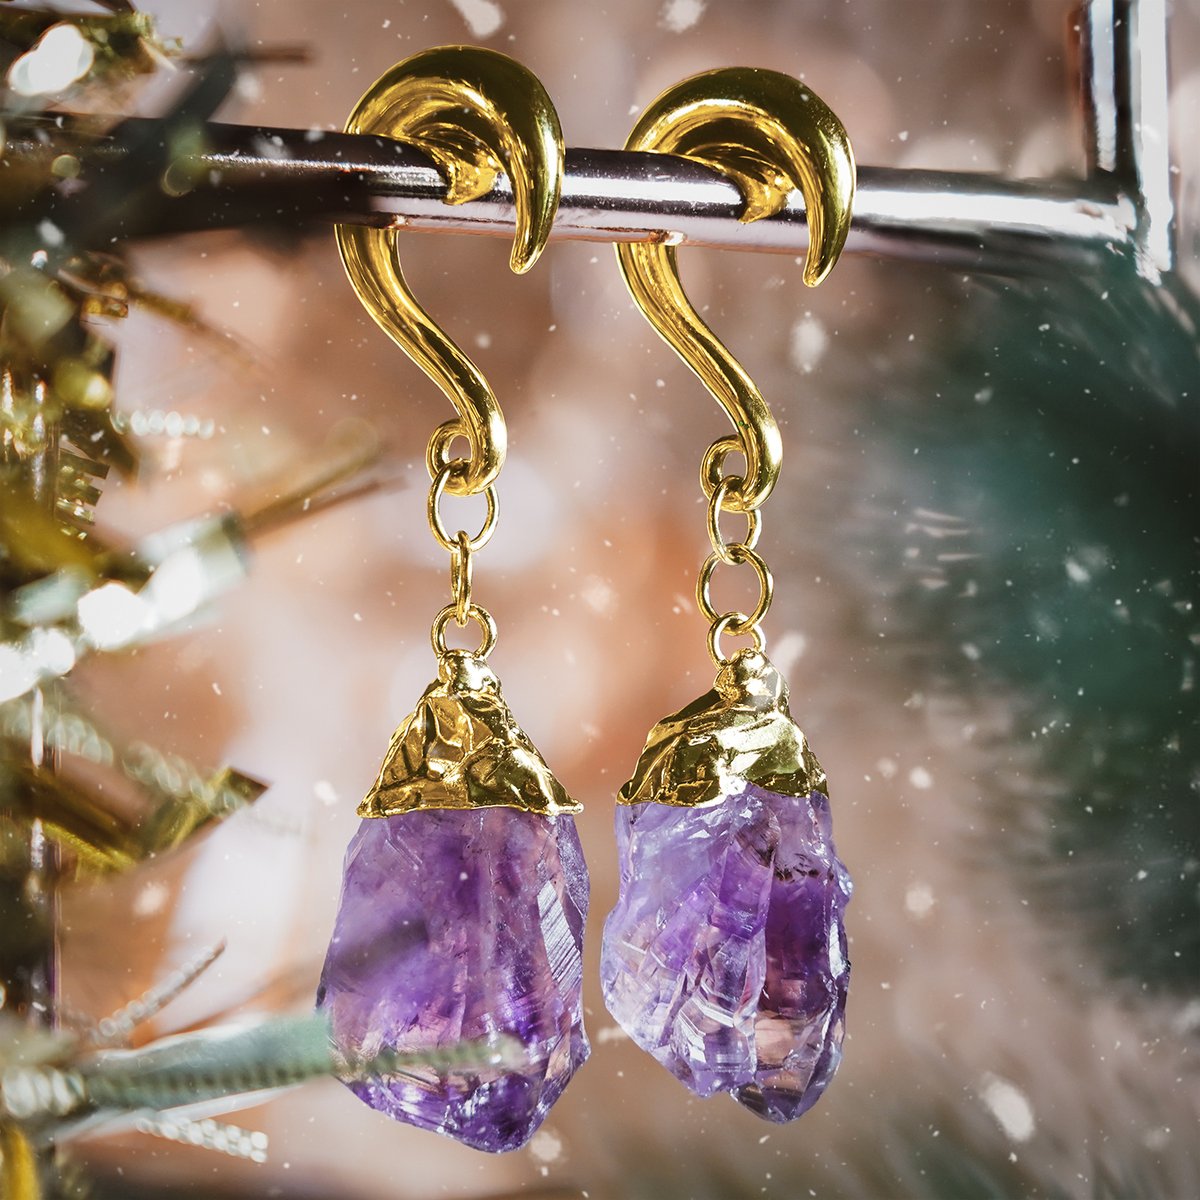 💜Treat yourself to a pair of our BRAND NEW Gold Hook & Amethyst Ear Weights! 💜 These are so stunning and elegant and bound to make you stand out from the crowd; Who’s buying a pair?! ✨
#CustomPlugs #EarWeights #EarHangers #Plugs #AmethystJewellery